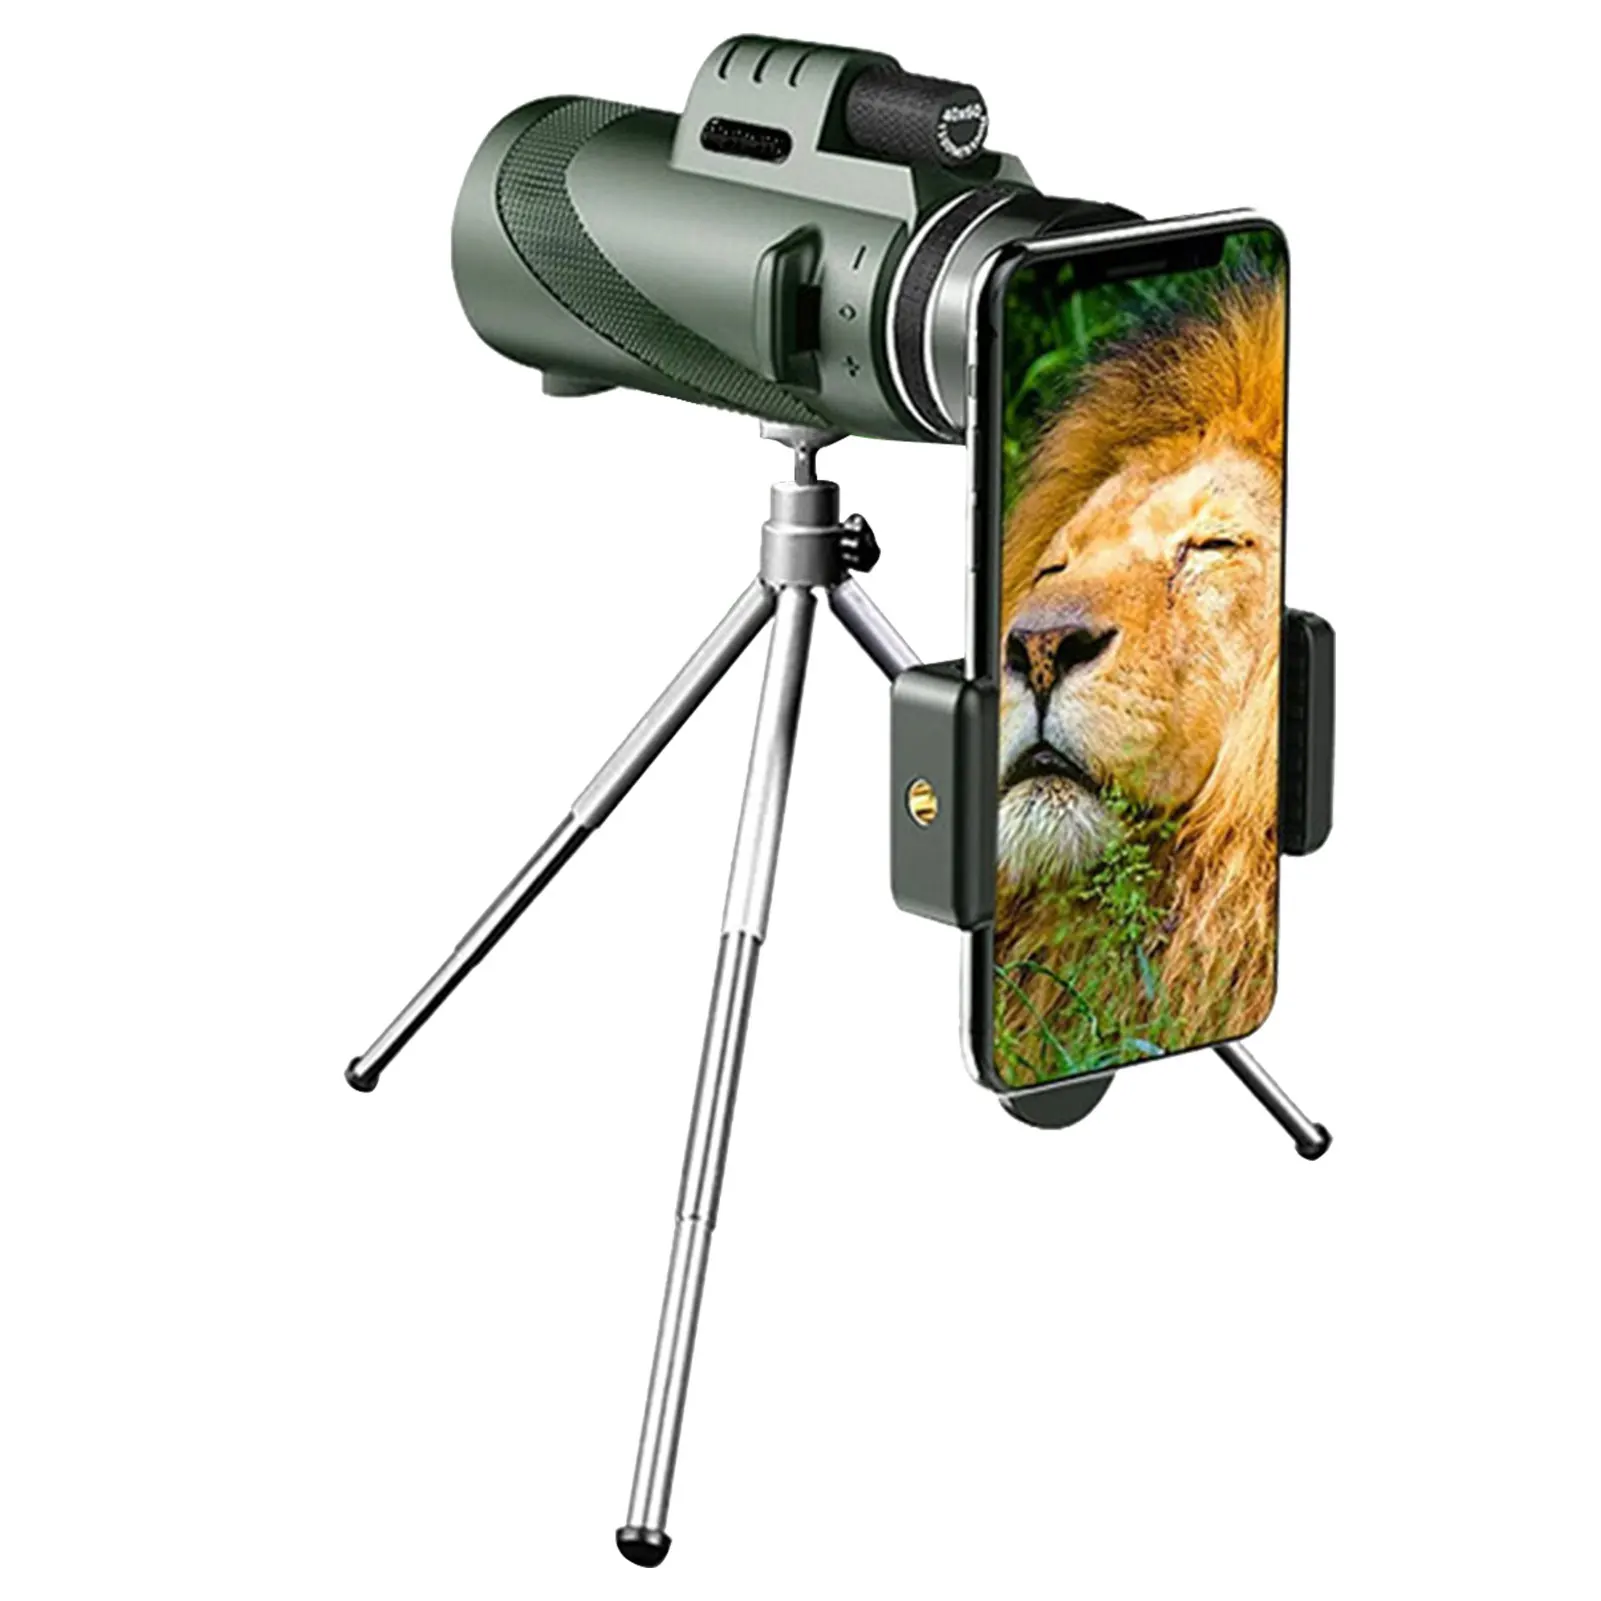 Outdoor BAK4 Prism Monoculars Telescope 40x60 HD with Tripod Cell Phone Adapter 